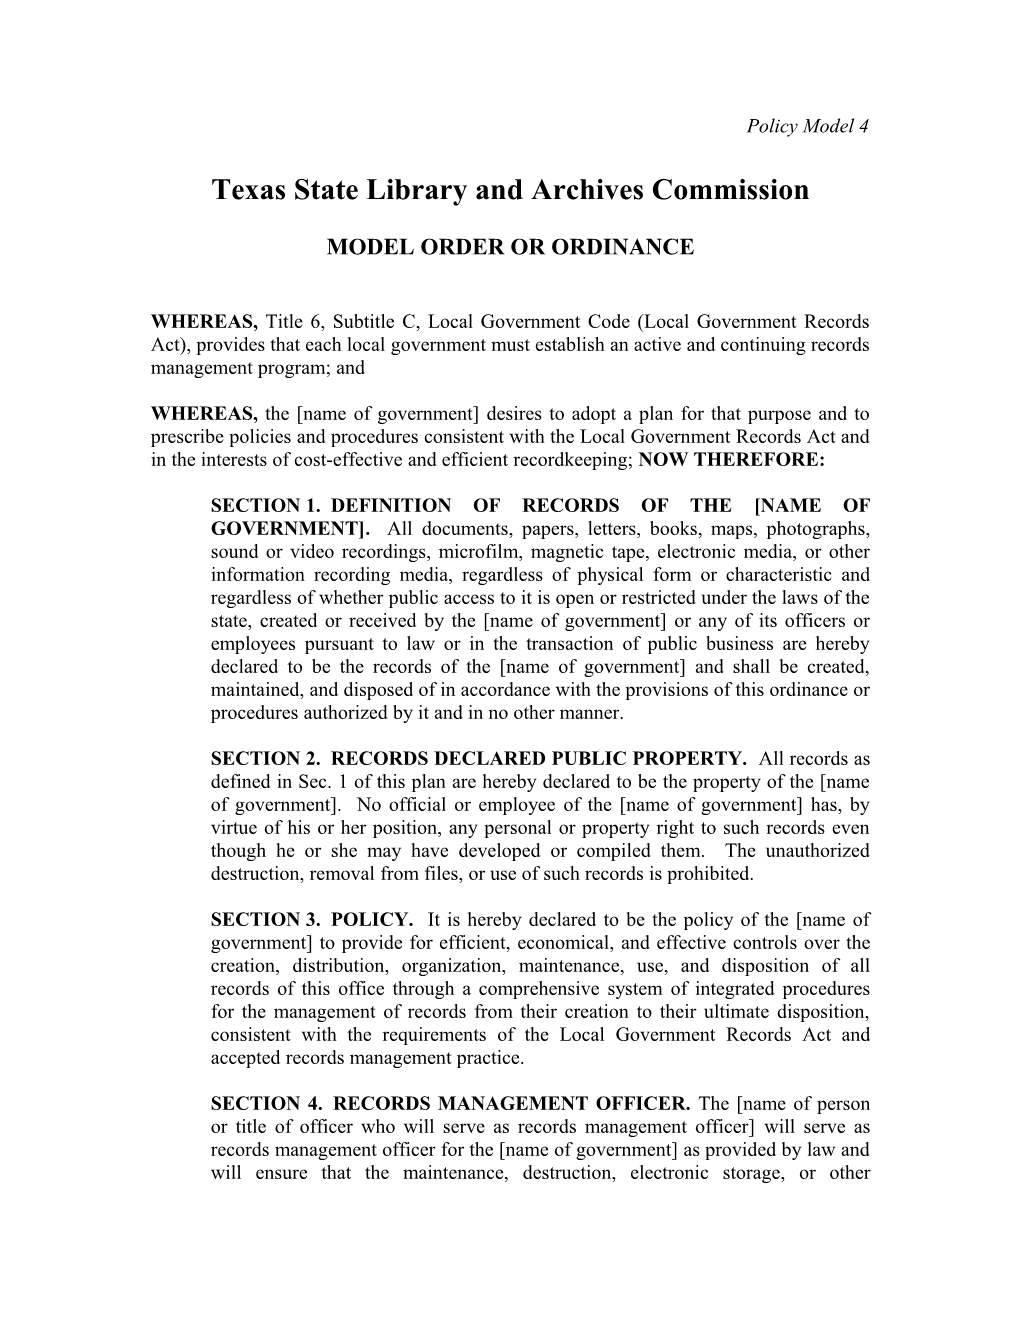 Texas State Library and Archives Commission s1